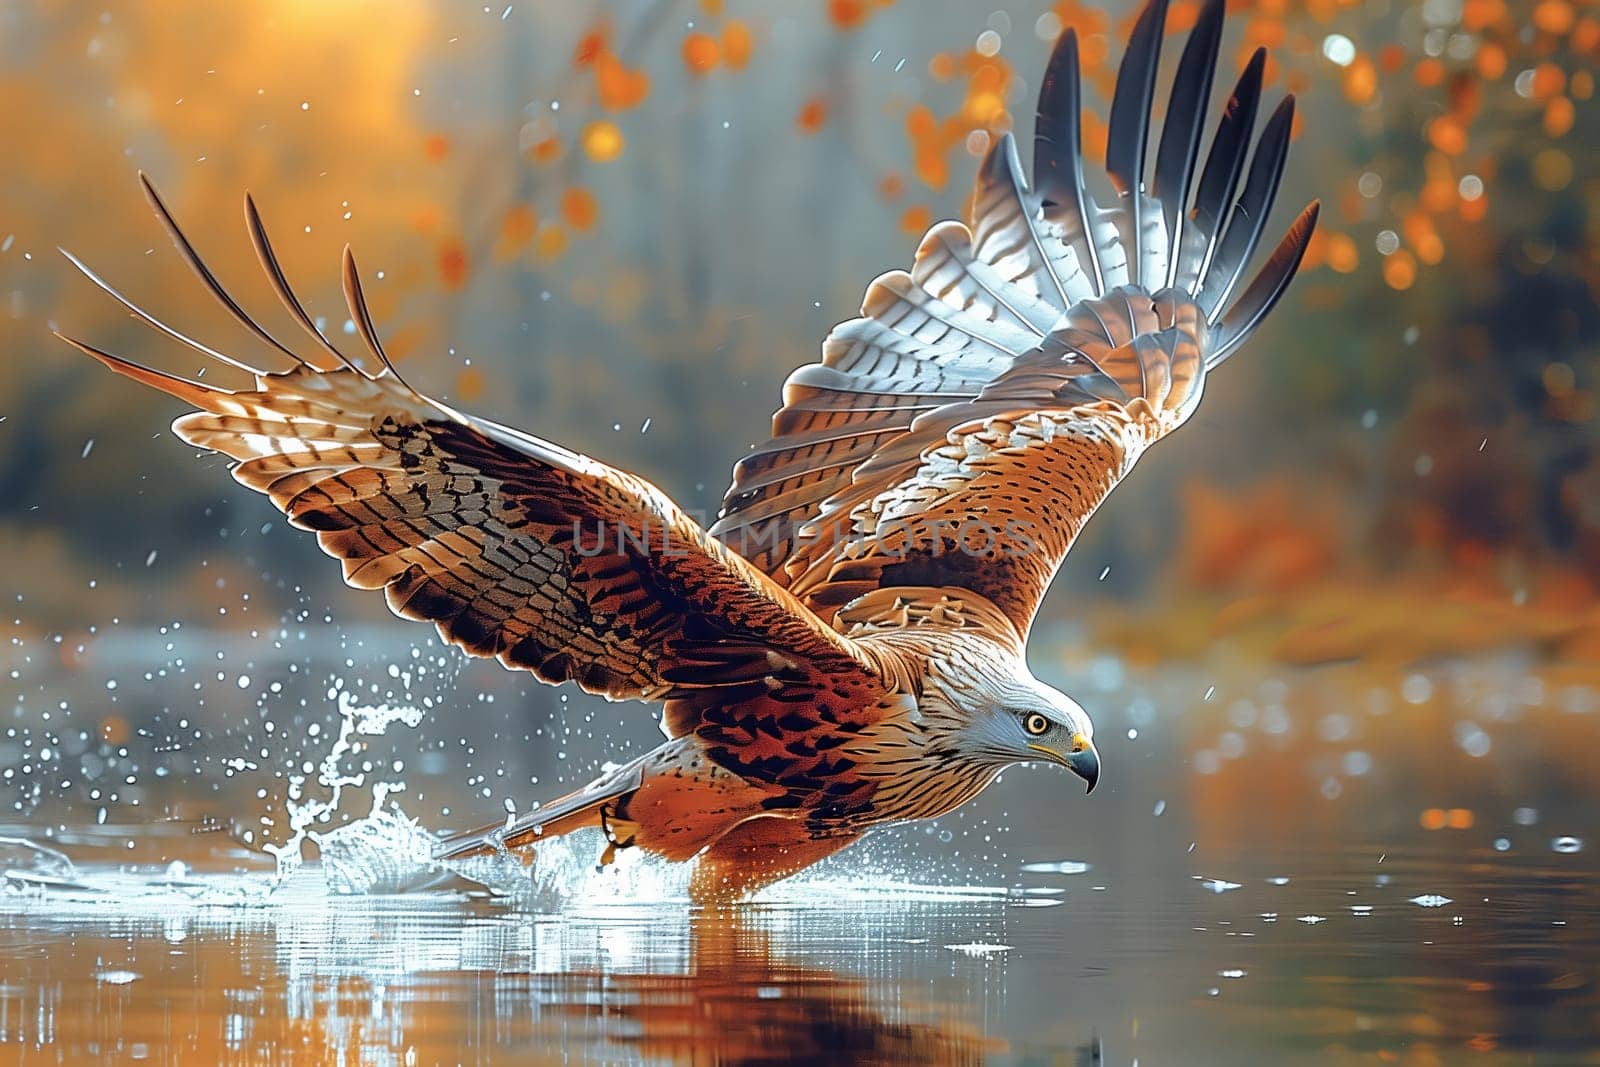 An Accipitridae bird, with powerful beak and feathered tail, soars gracefully over the liquid surface of a body of water, showcasing natures beauty